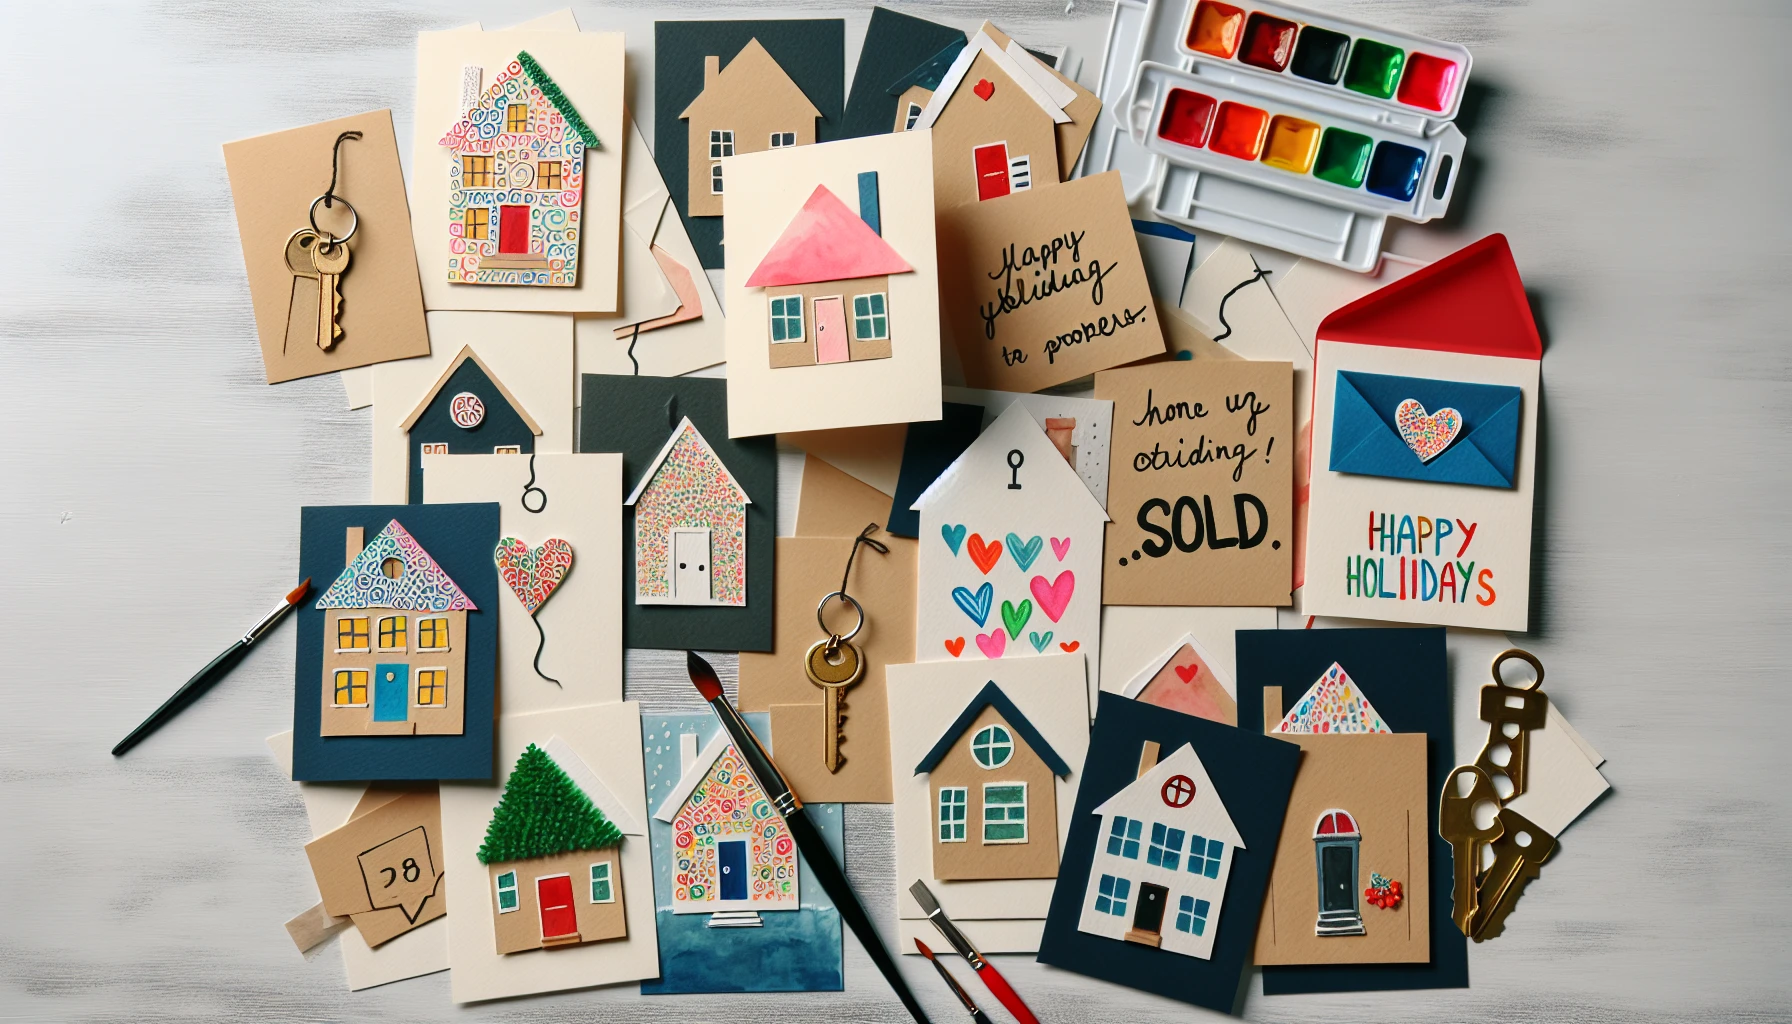 Personalizing holiday cards for real estate clients